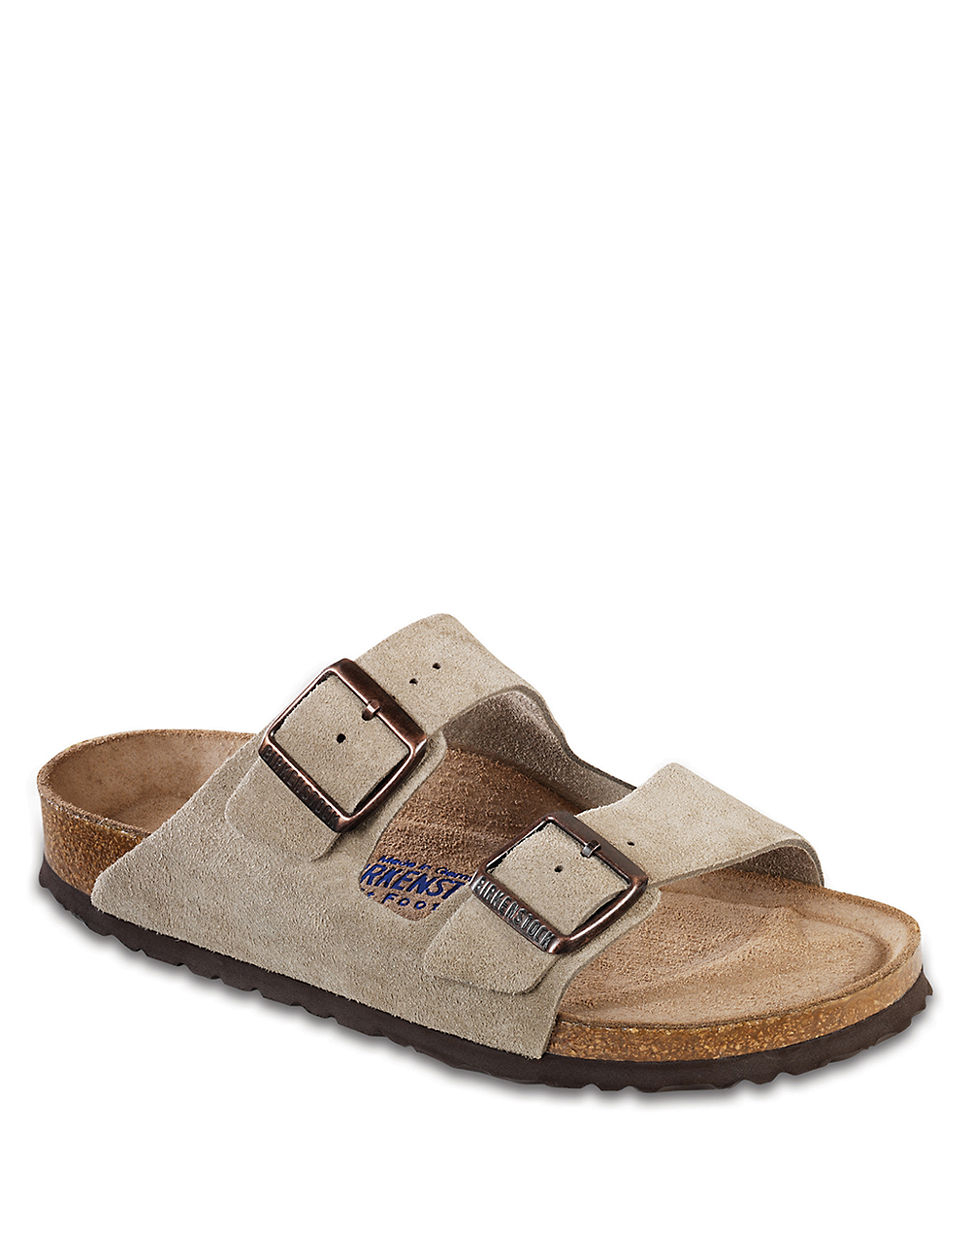 Birkenstock Arizona Suede Double-Strap Sandals in Gray (Taupe) | Lyst